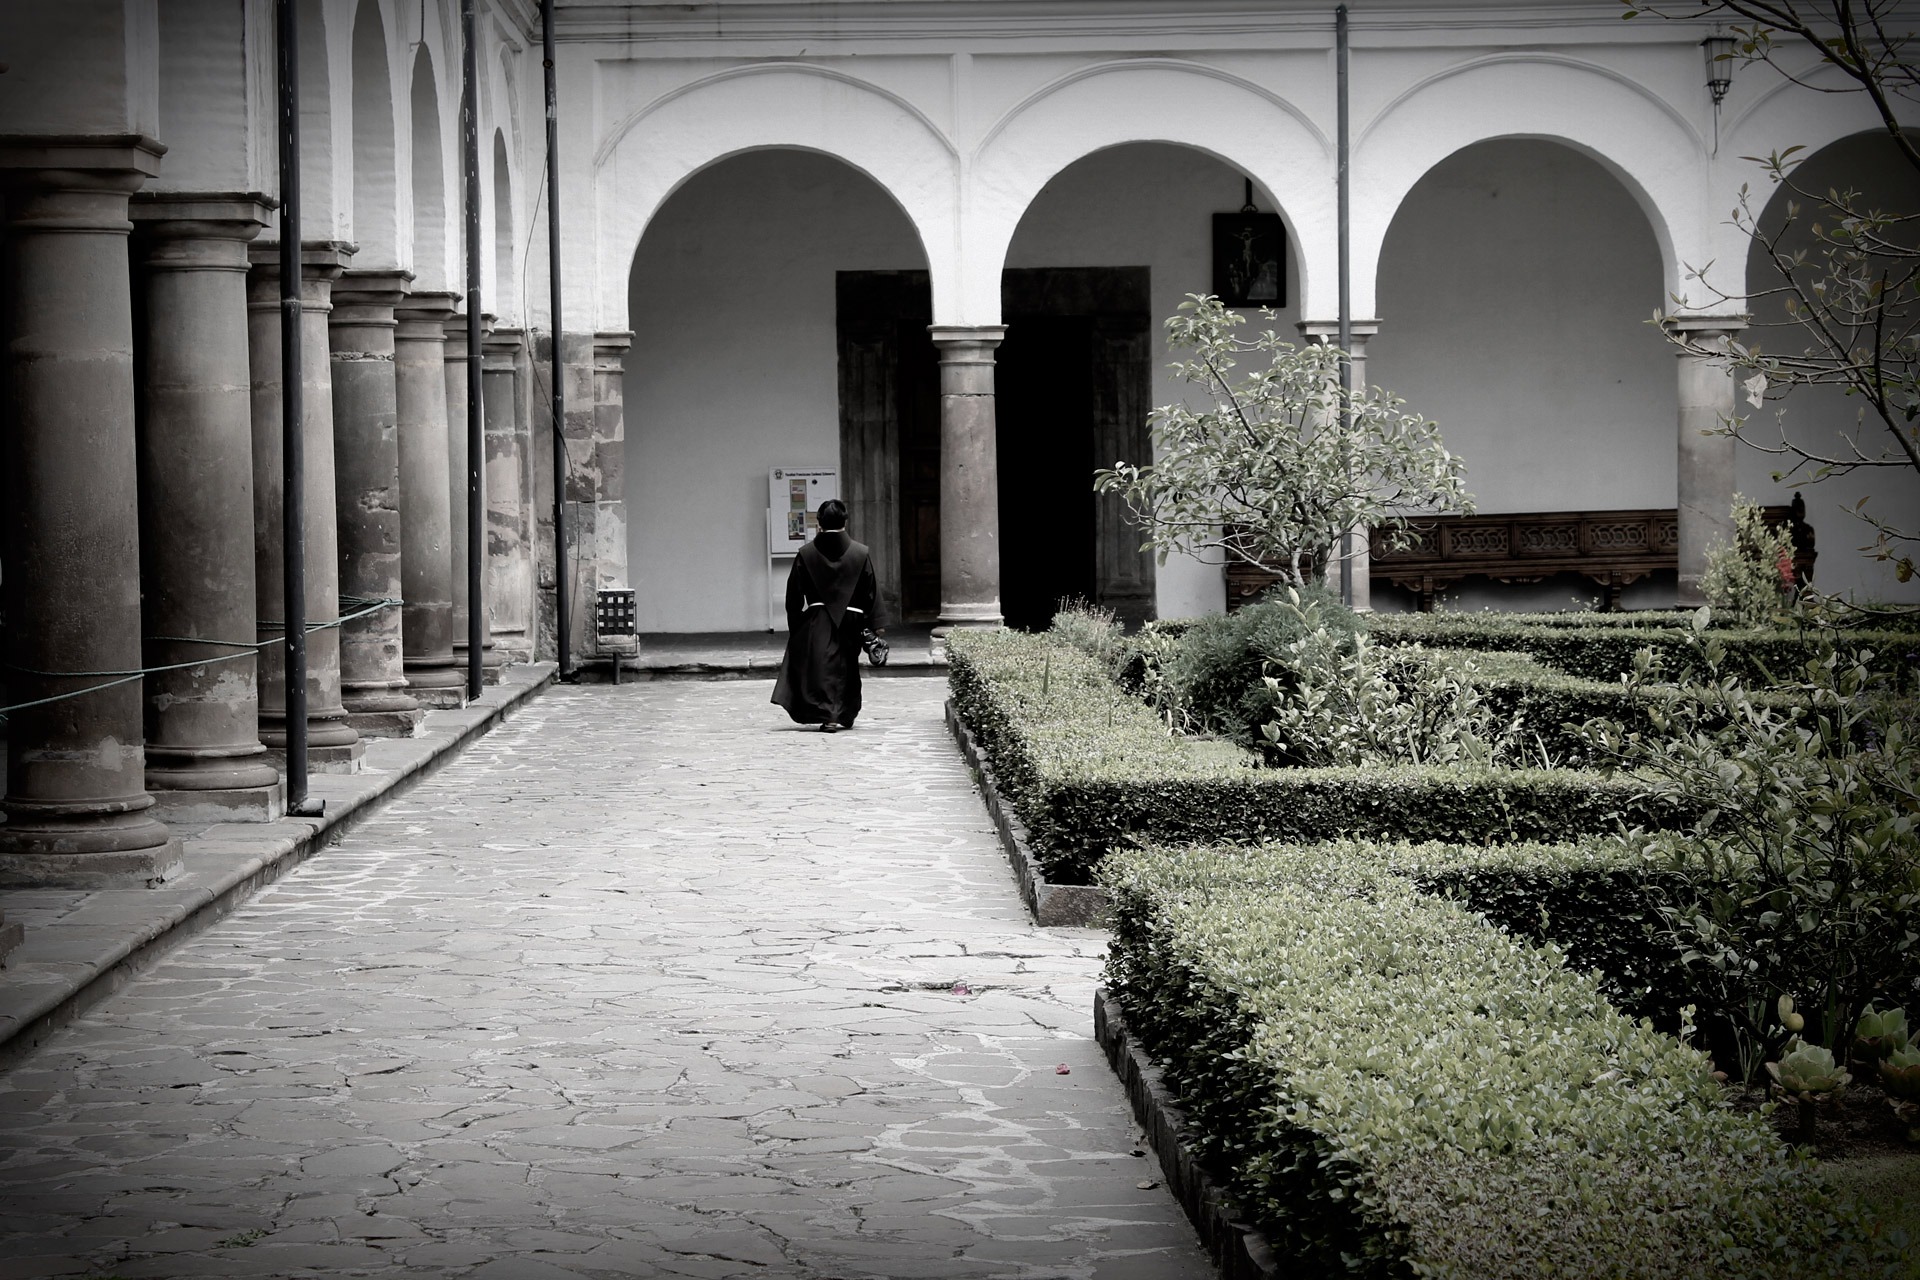 Cloister of a convent